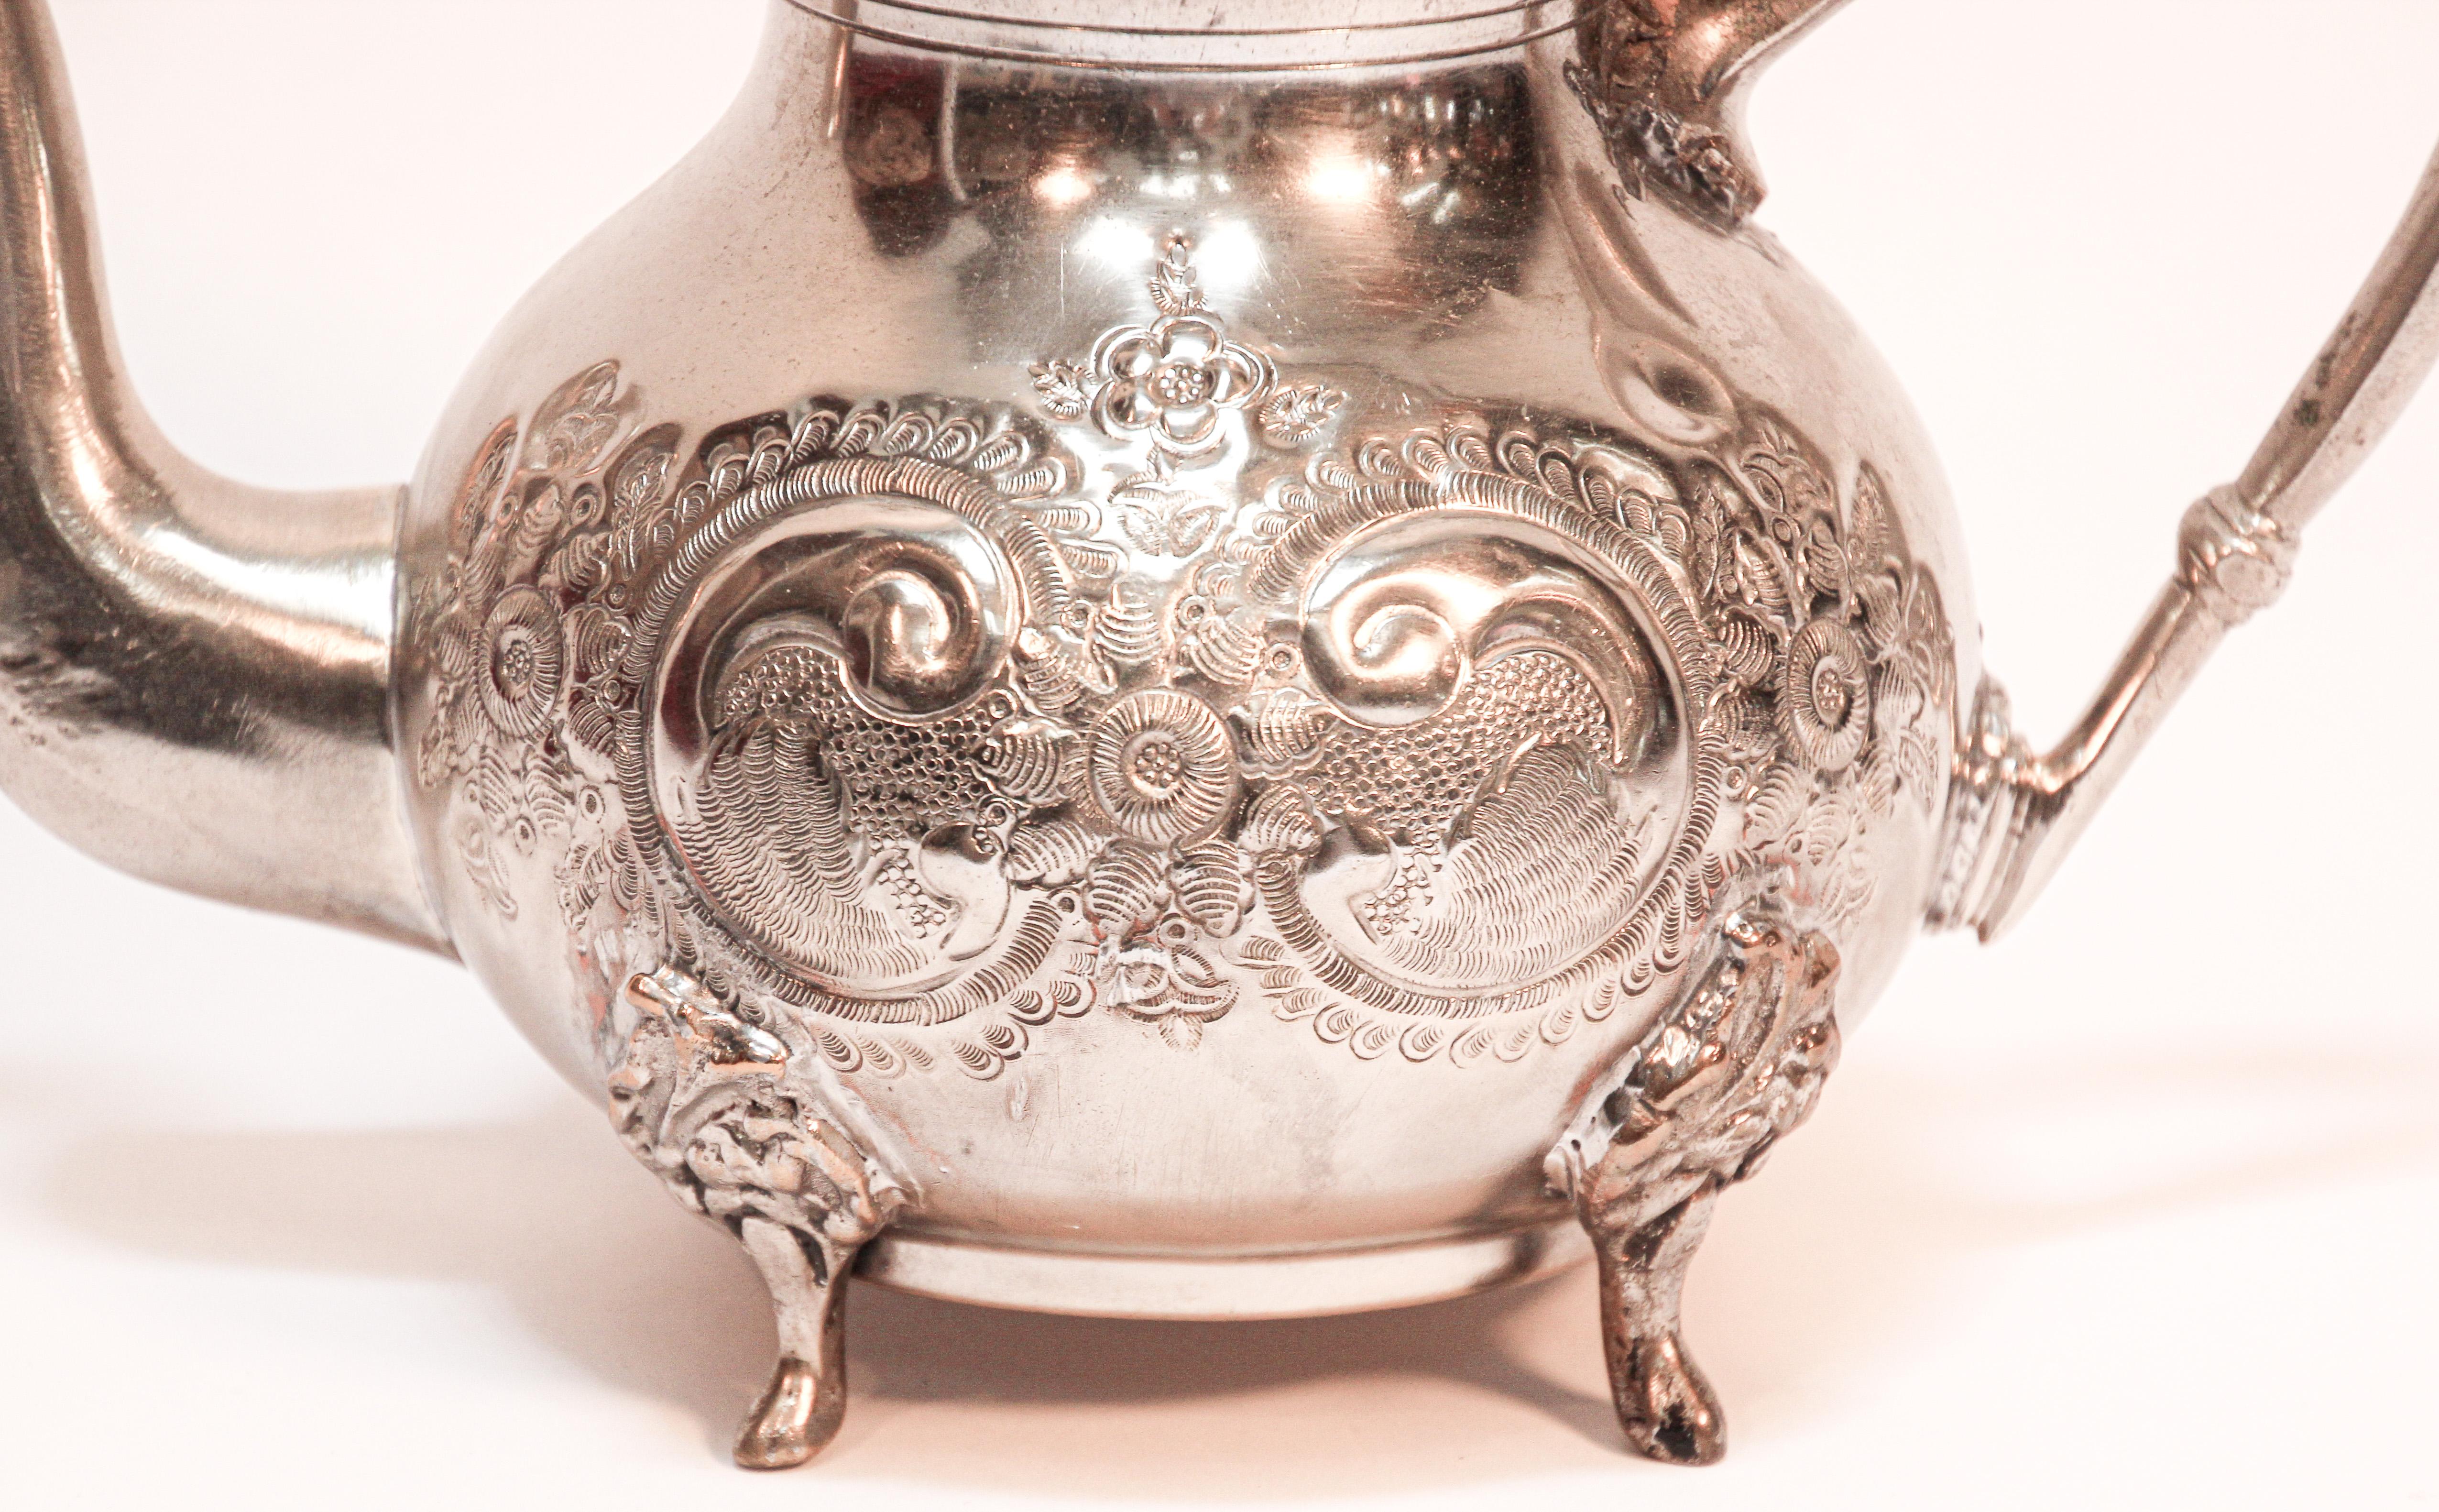 Traditional vintage silver plated and brass Moroccan tea pot, embossed with traditional repousse design, nicely aged, handcrafted in Fez, stamped in bottom.
Great silver plated and brass decorative Islamic art object.
Will make a great gift.